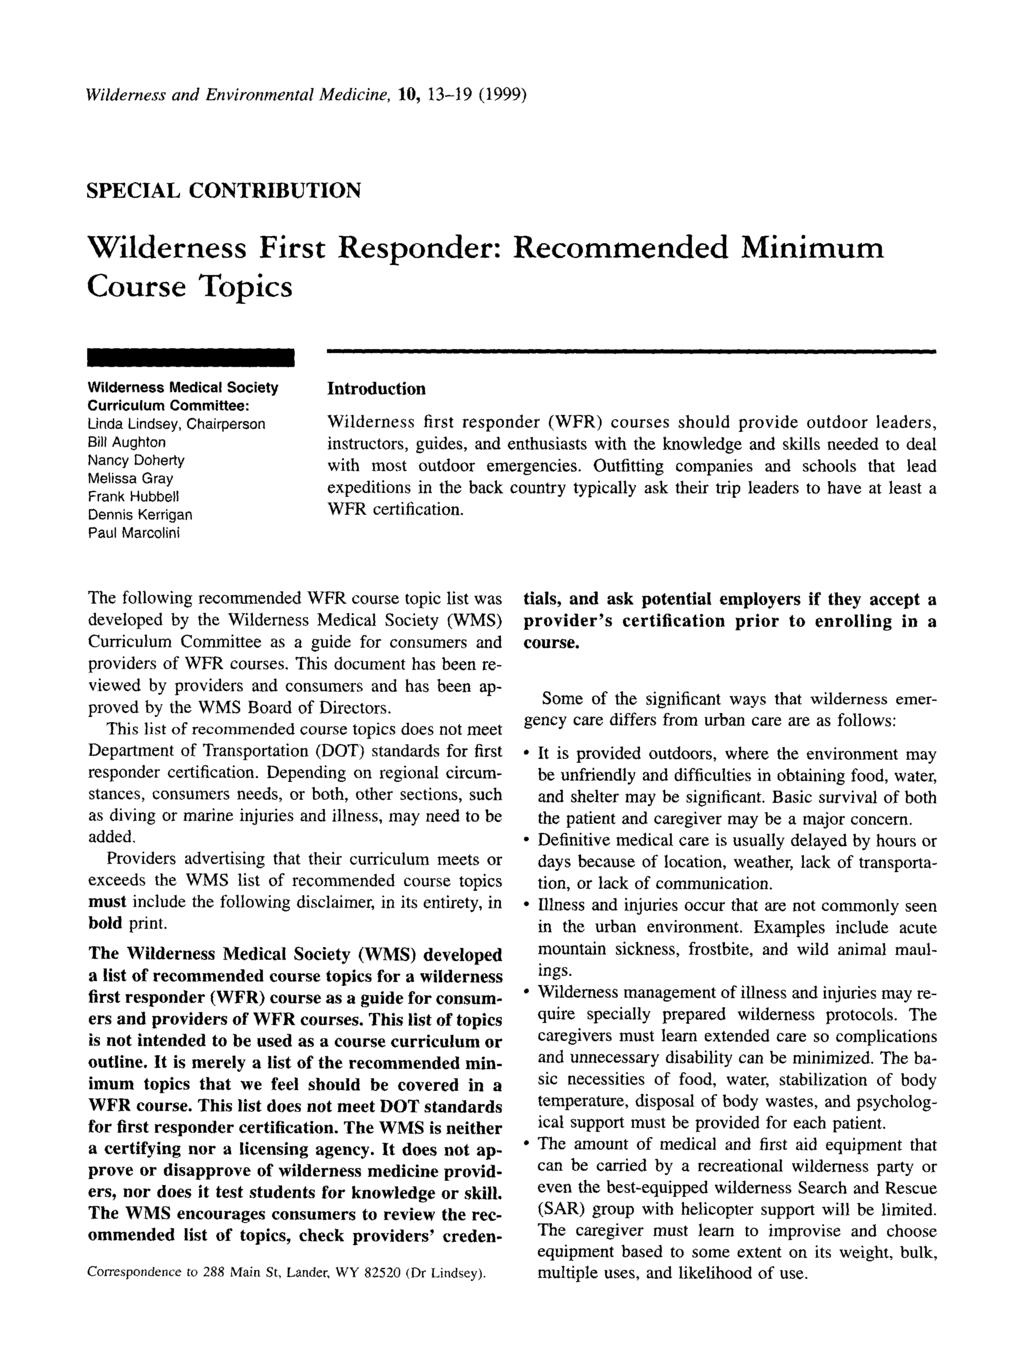 Wilderness and Environmental Medicine, 10, 13-19 (1999) SPECIAL CONTRIBUTION Wilderness First Responder: Recommended Minimum Course Topics Wilderness Medical Society Curriculum Committee: Linda